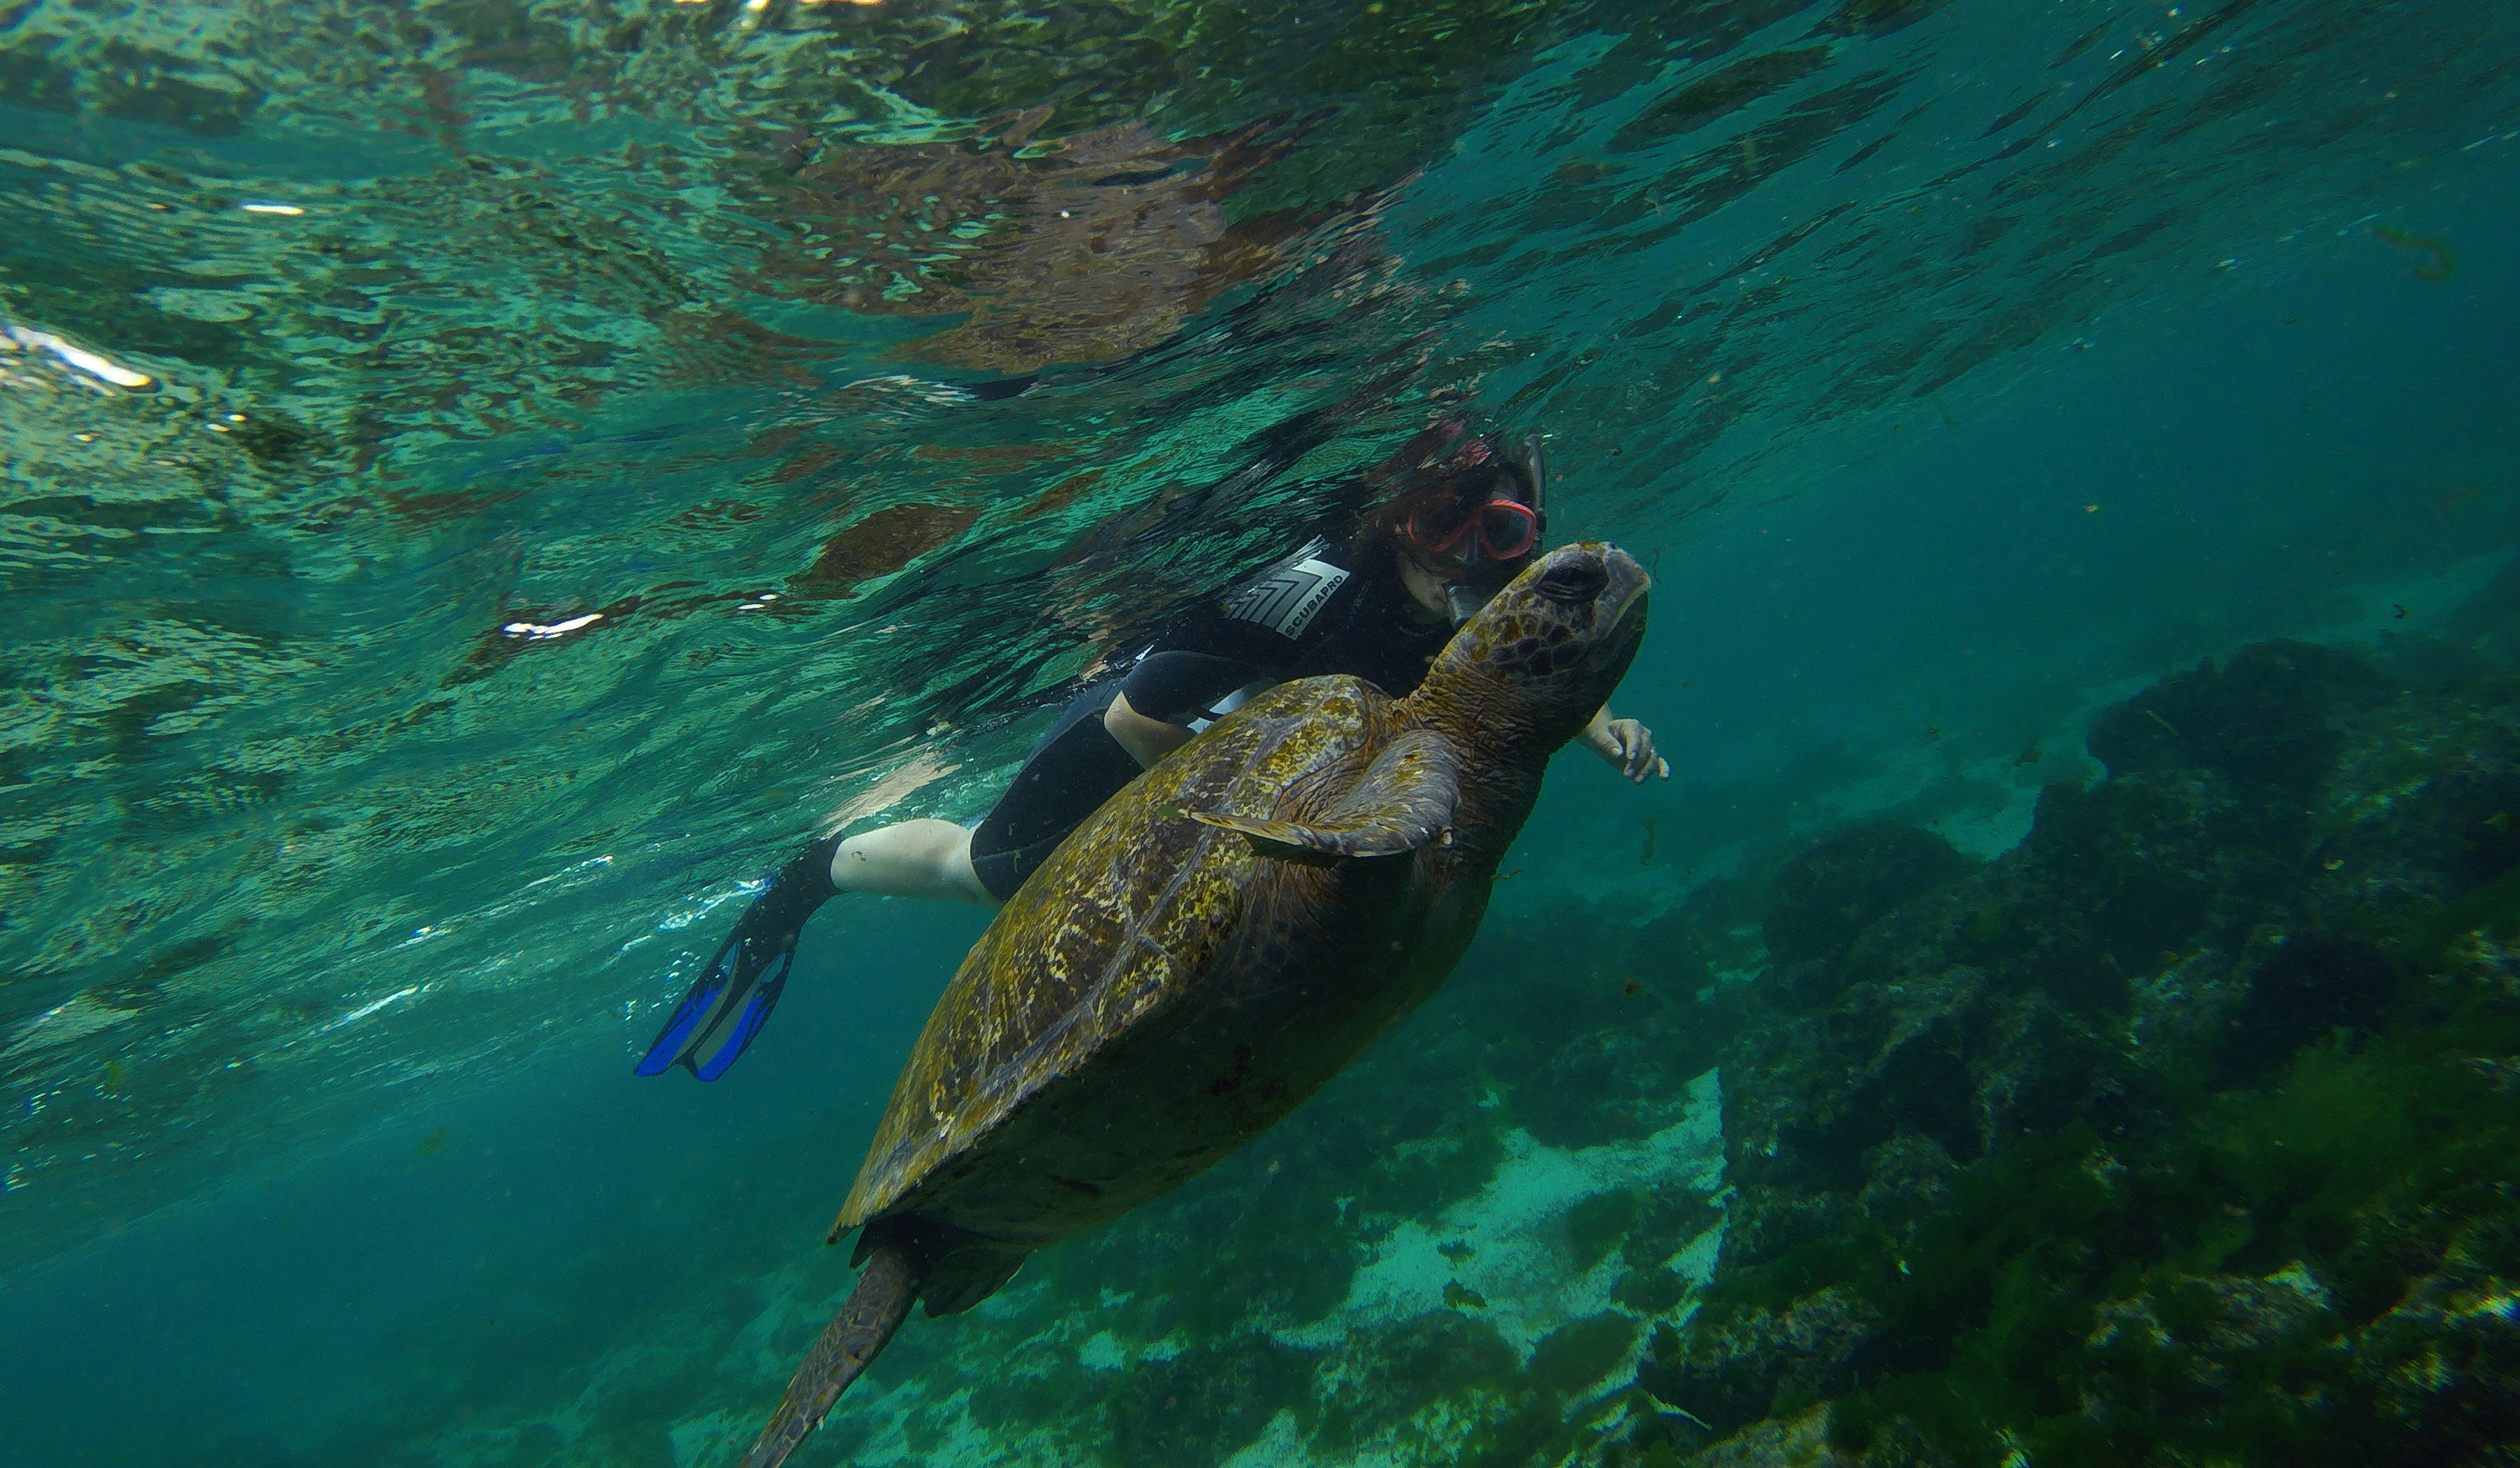 A turtle swims next to a tourist in San Cristobal Island at Galapagos Marine Reserve, Ecuador, October 10, 2016. REUTERS/Nacho Doce